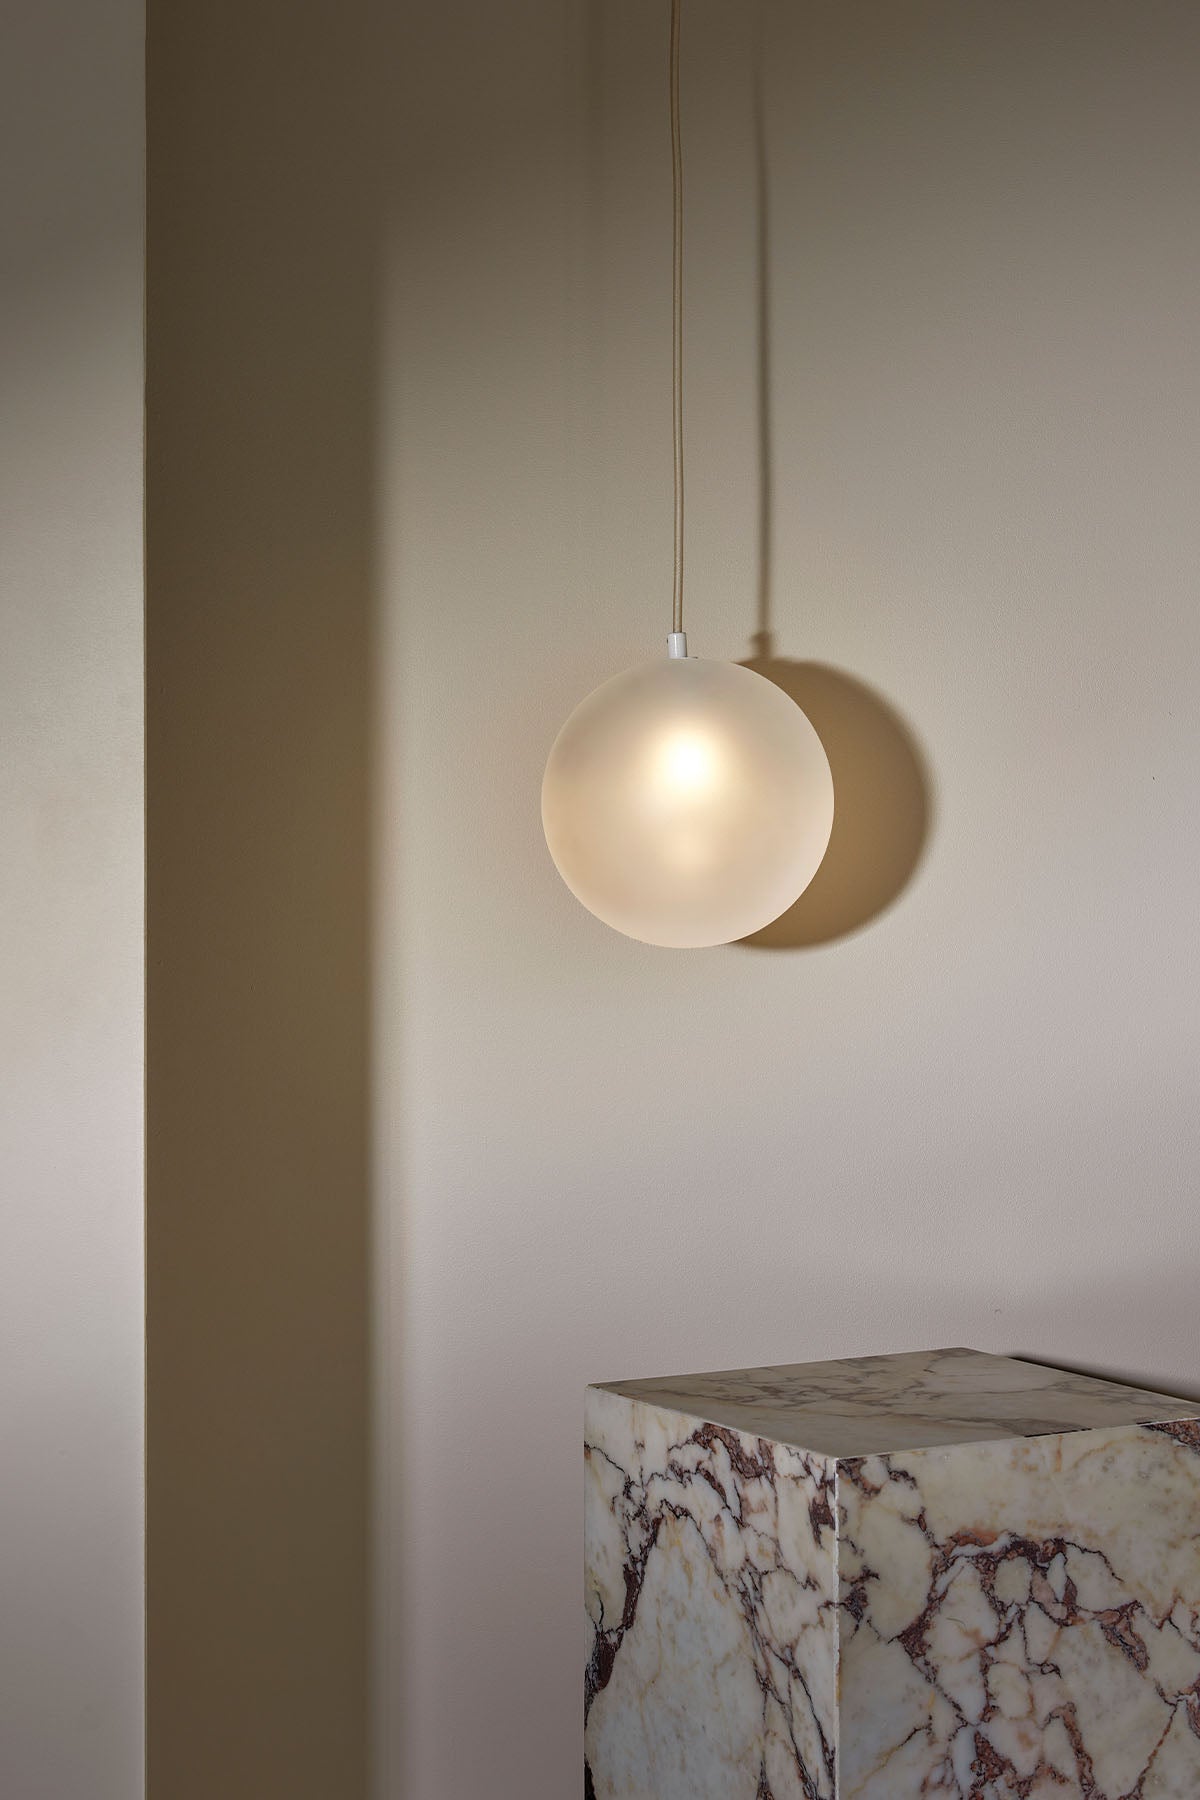 Orb Pendant, Large in Brass and Clear Frosted. Image by Lawrence Furzey